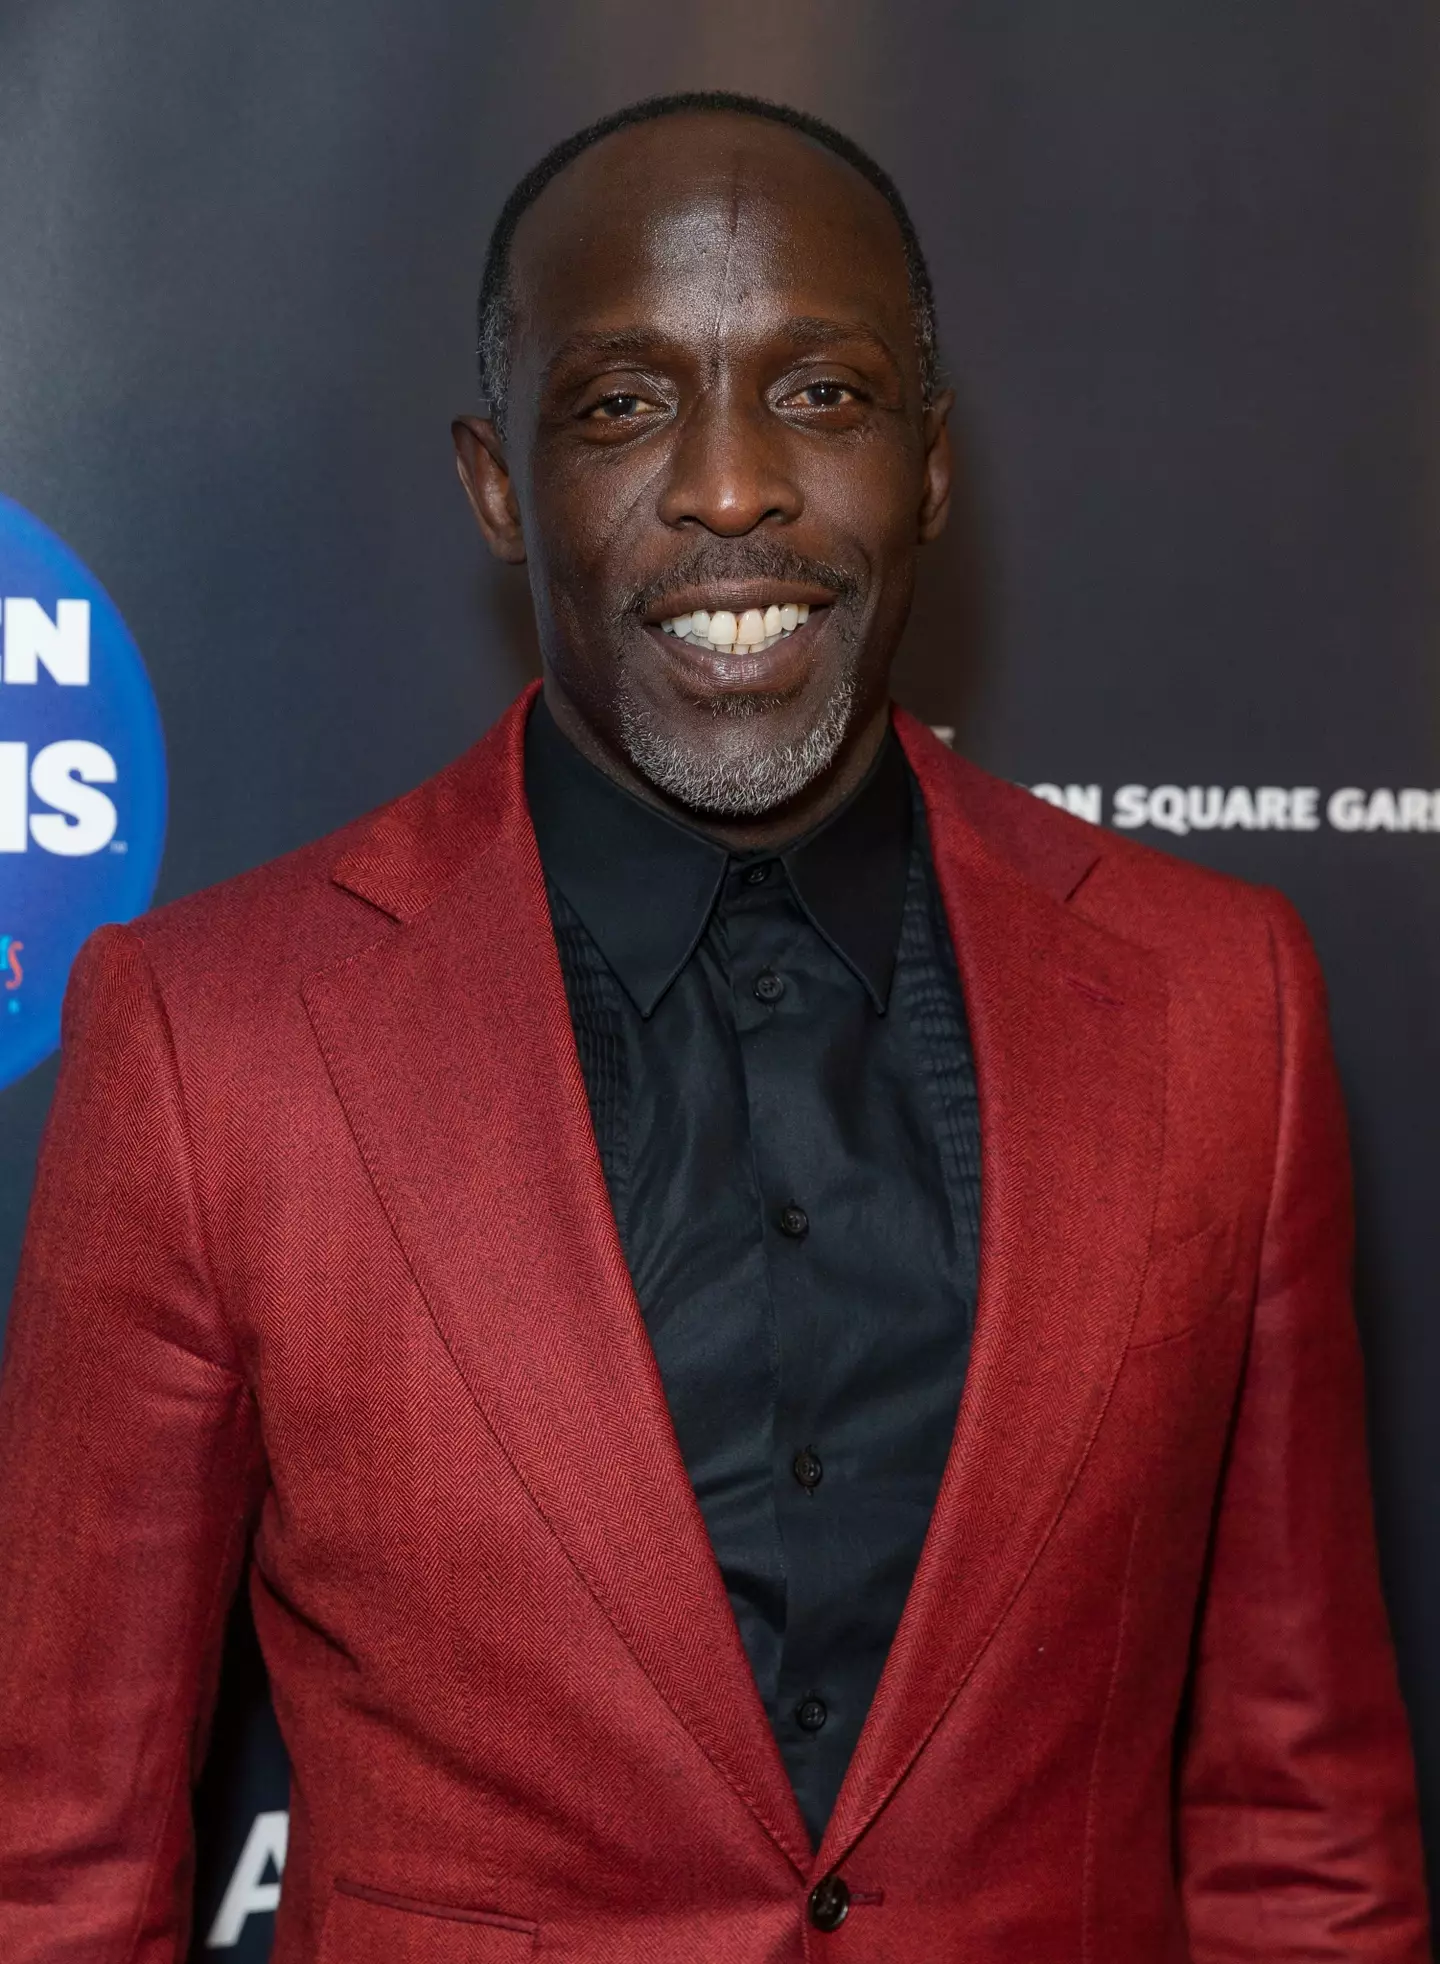 The man who sold Michael K. Williams drugs before he died finally plead guilty to his crimes yesterday (5 April).